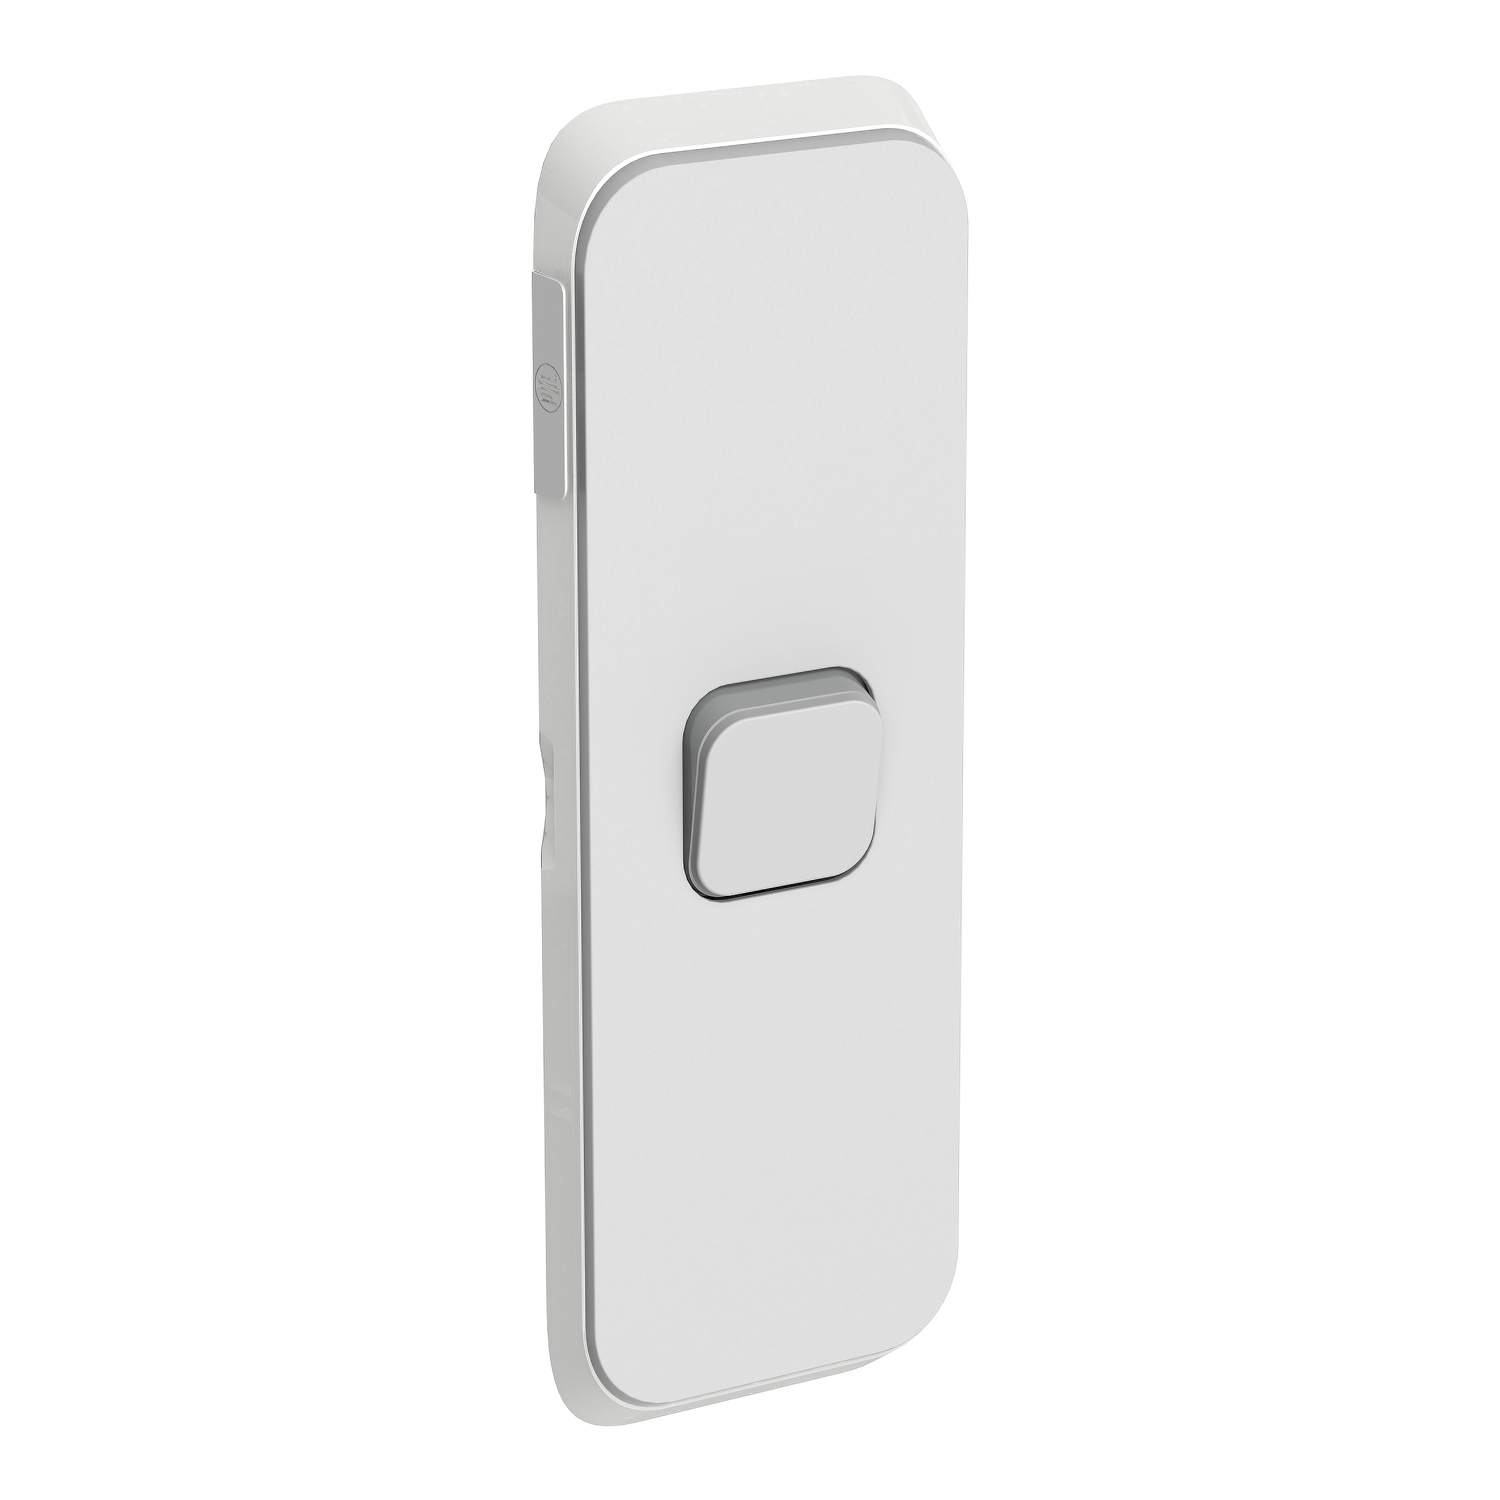 PDL Iconic - Cover Plate Switch Architrave 1-Gang - Cool Grey